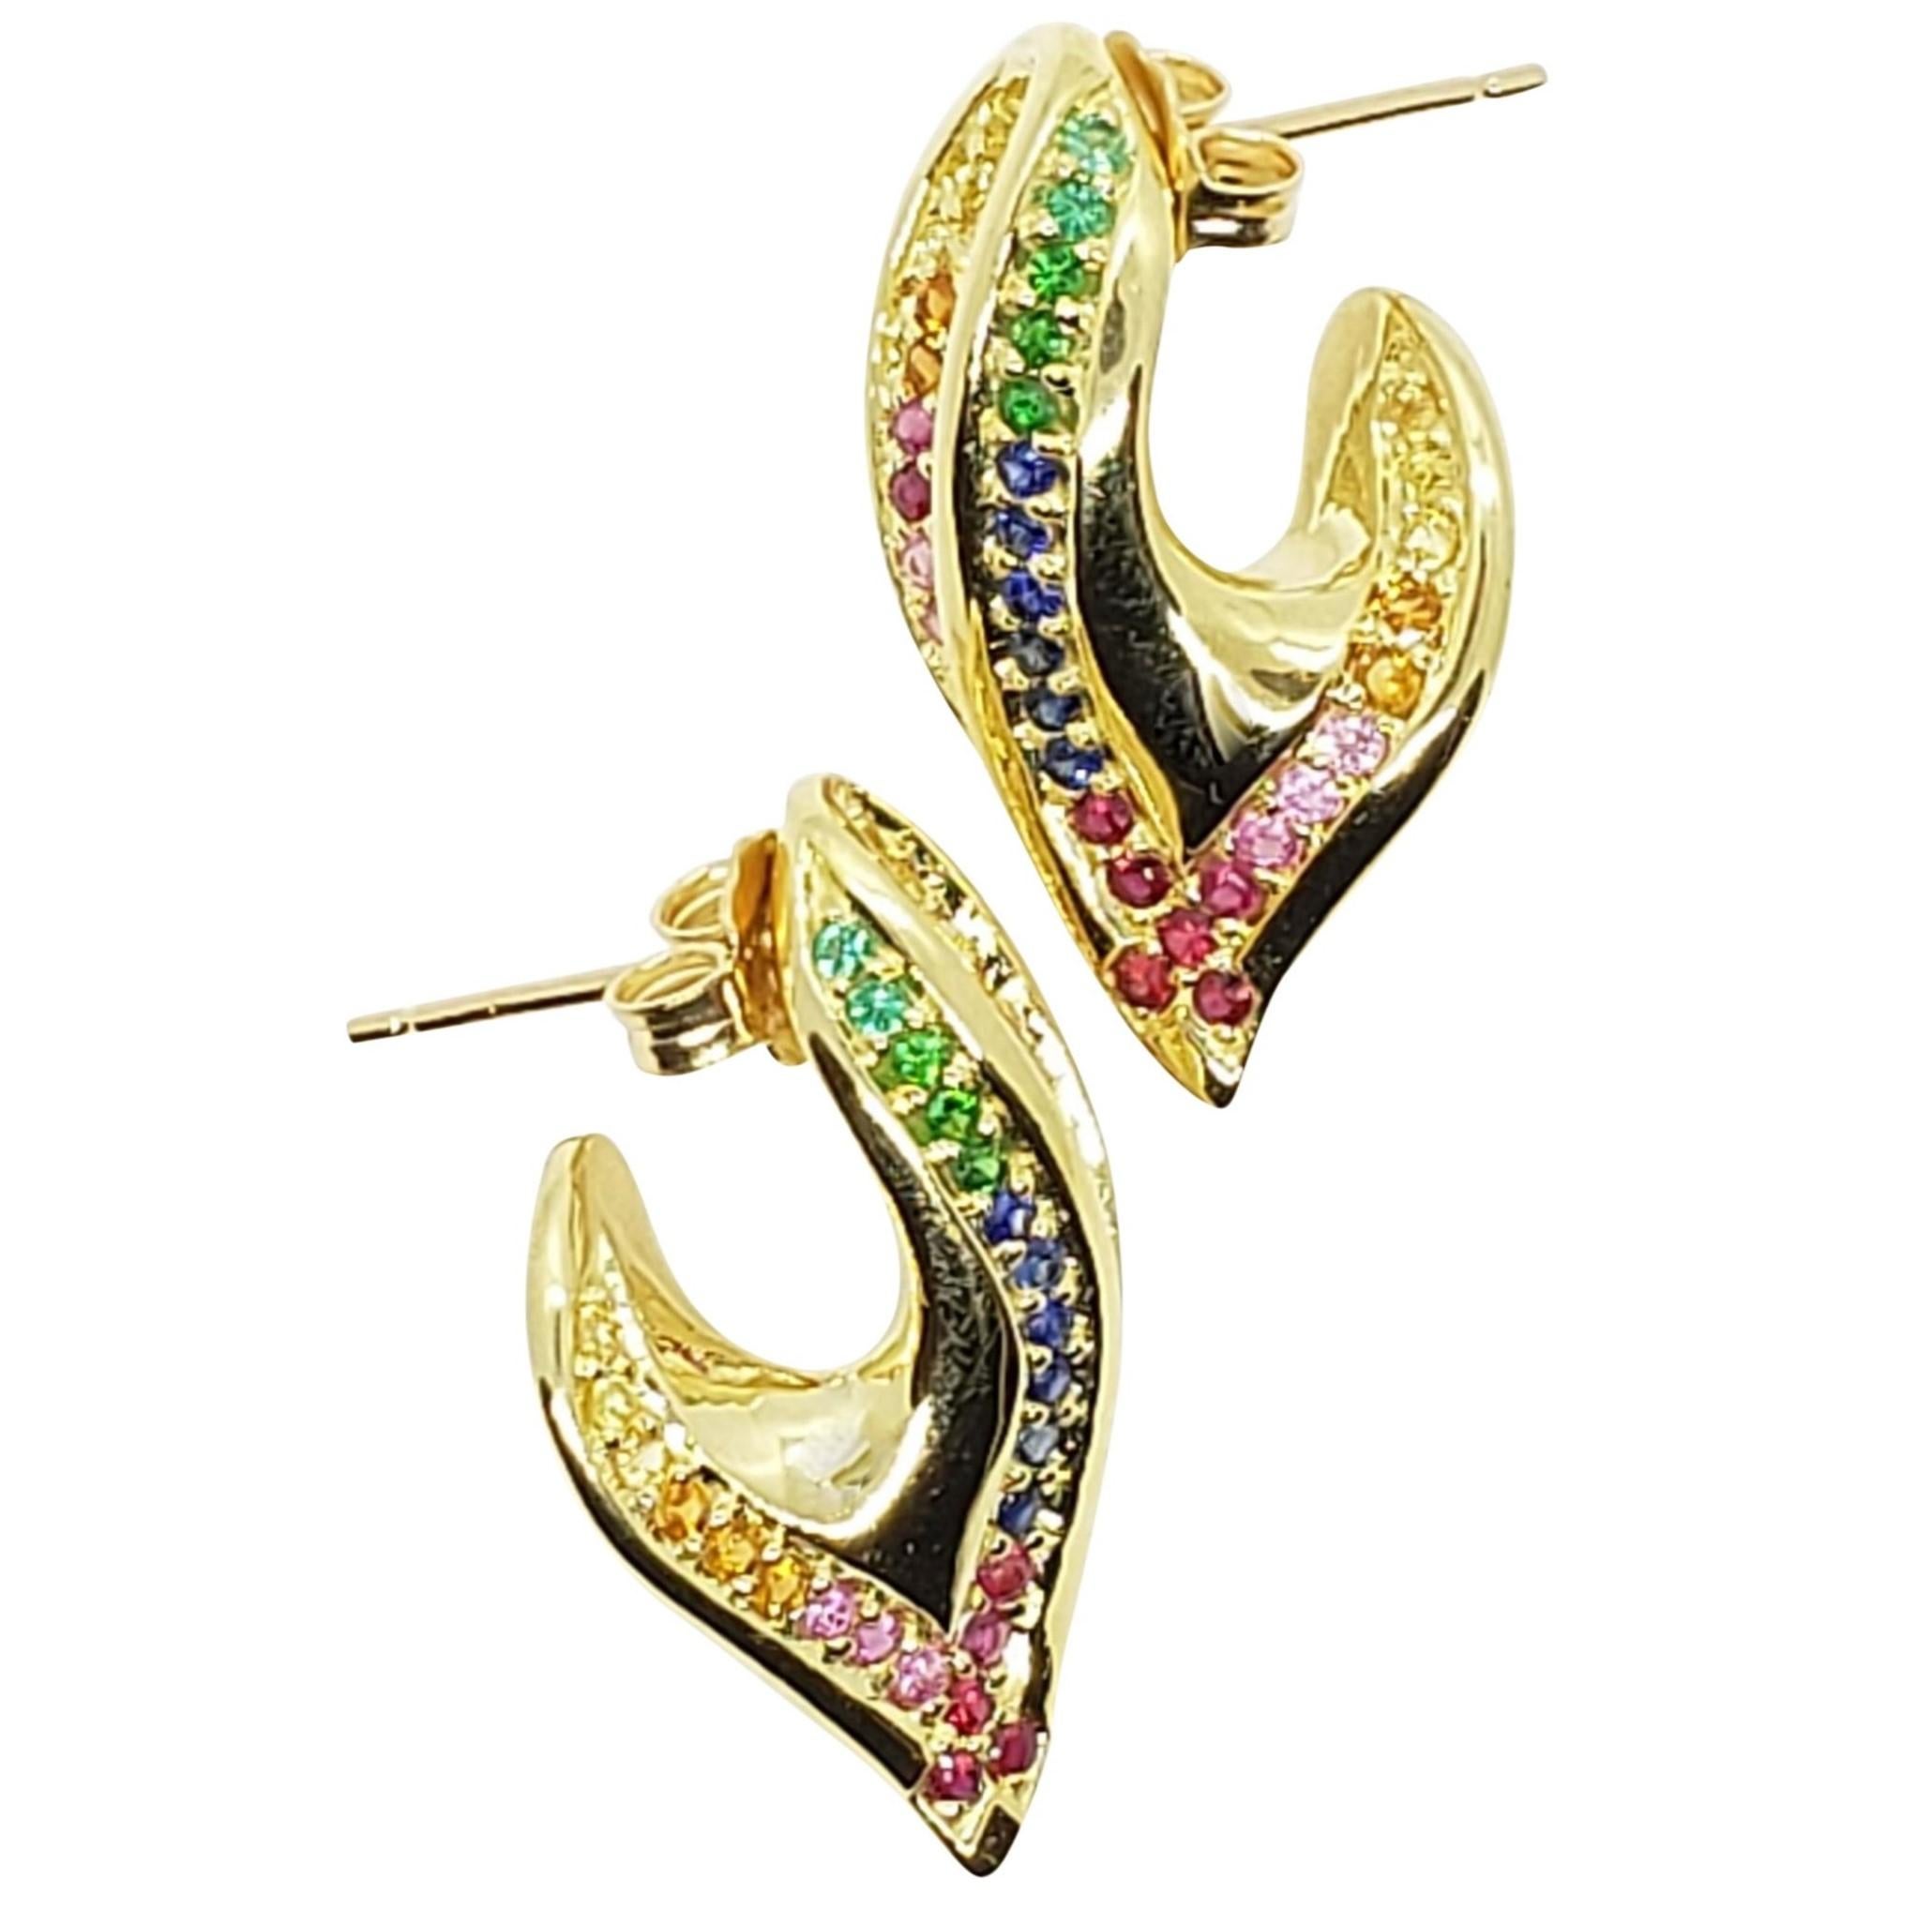 Round Cut Sculptural Ear Hugging Scarf Earrings in Rainbow Precious Gemstones and 18K Gold For Sale